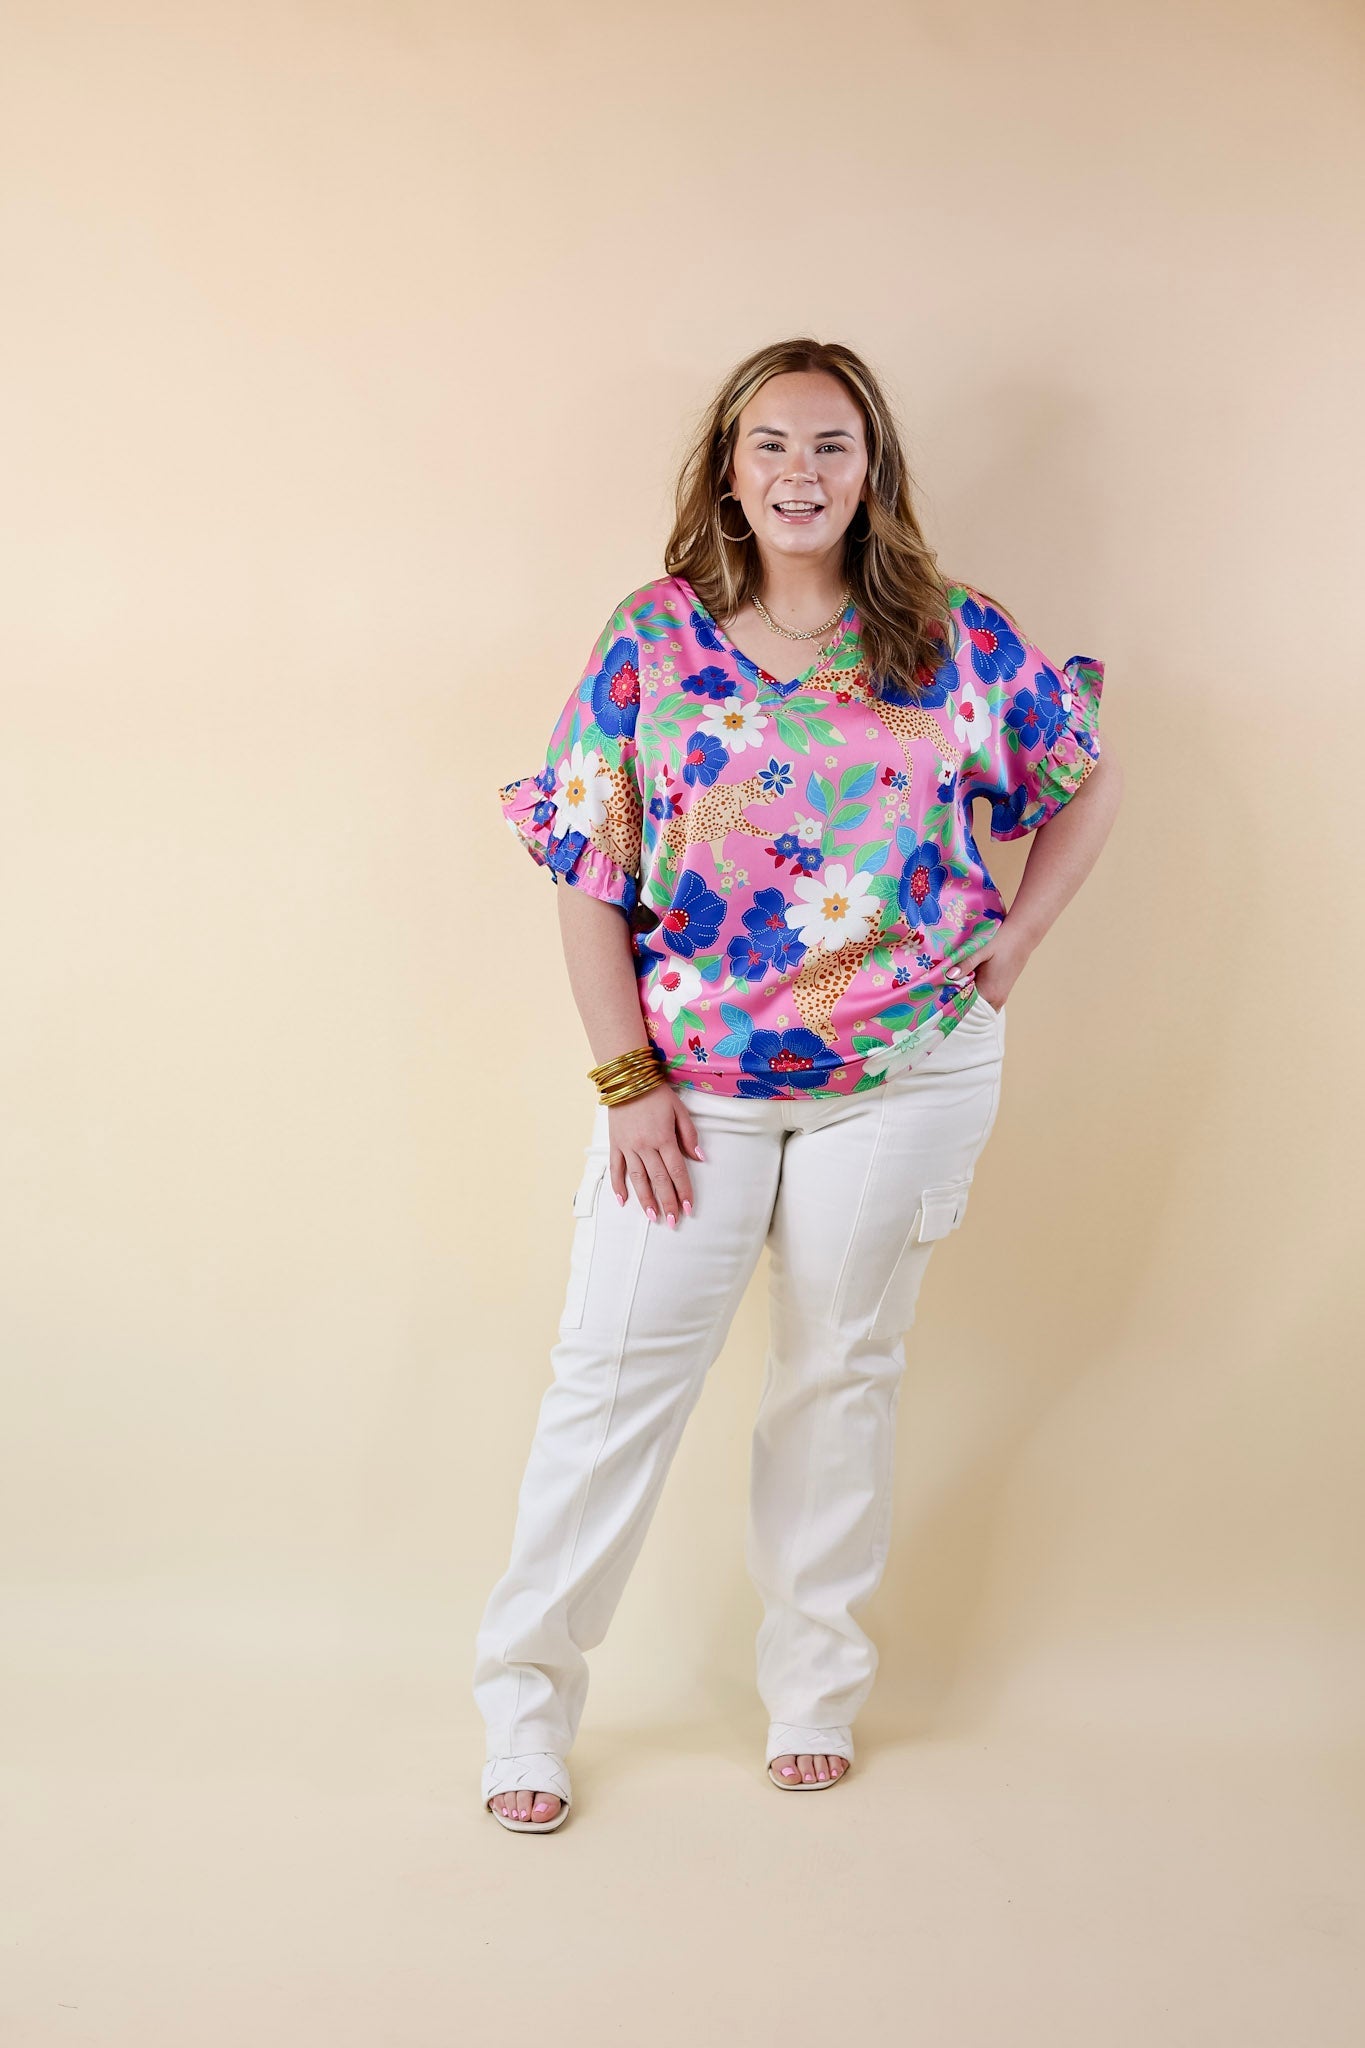 Best Version Floral and Cheetah Print V Neck Top with Ruffle Short Sleeves in Pink - Giddy Up Glamour Boutique